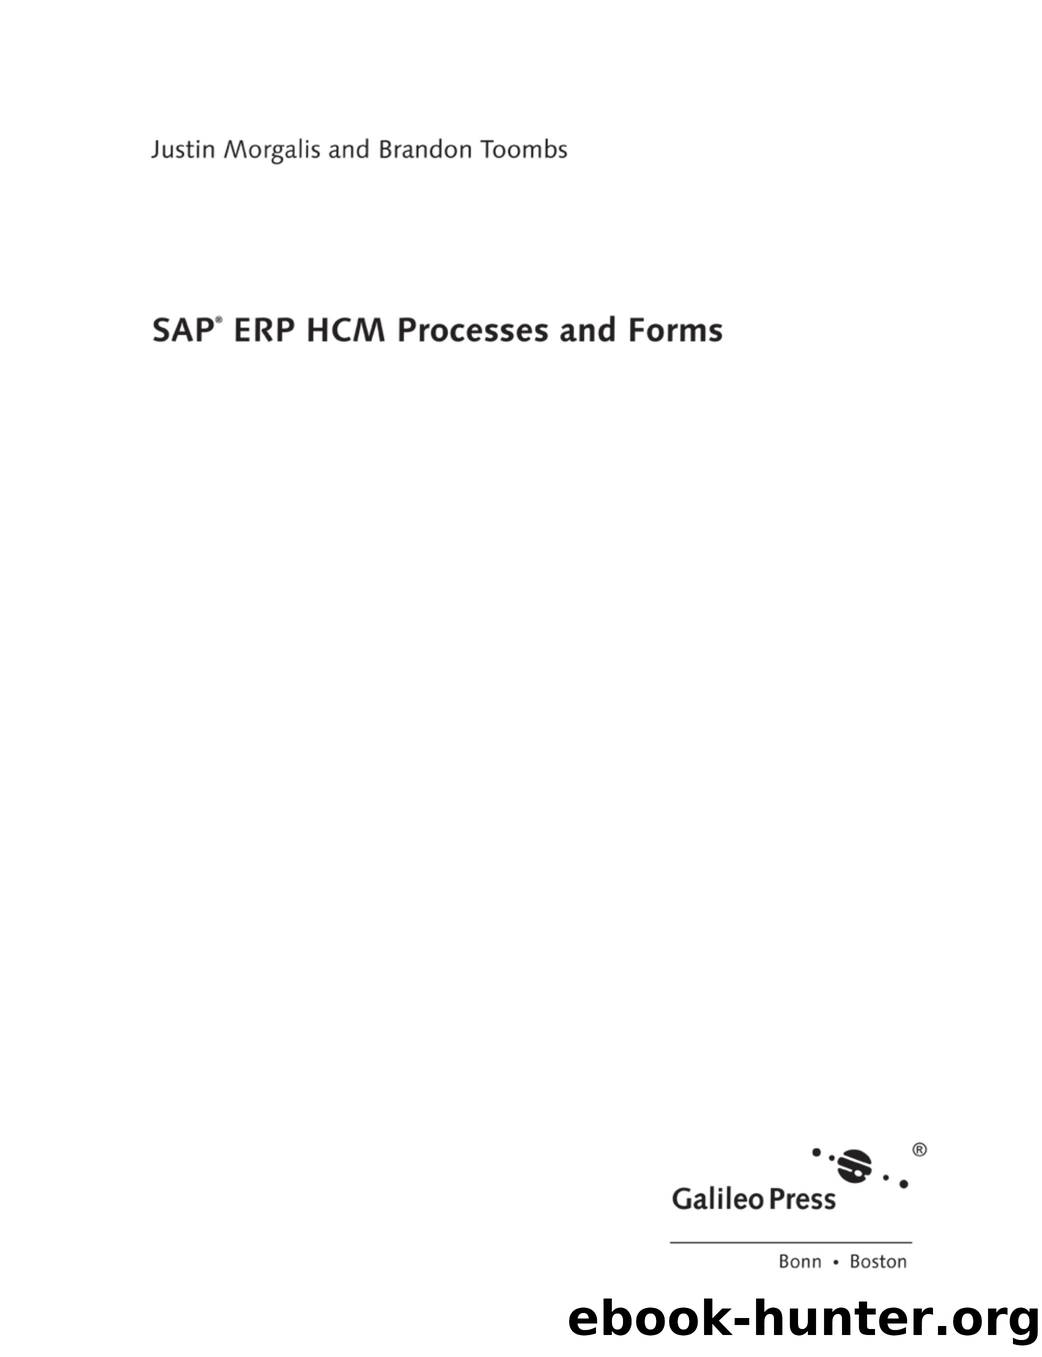 SAP ERP HCM Processes and Forms by Unknown